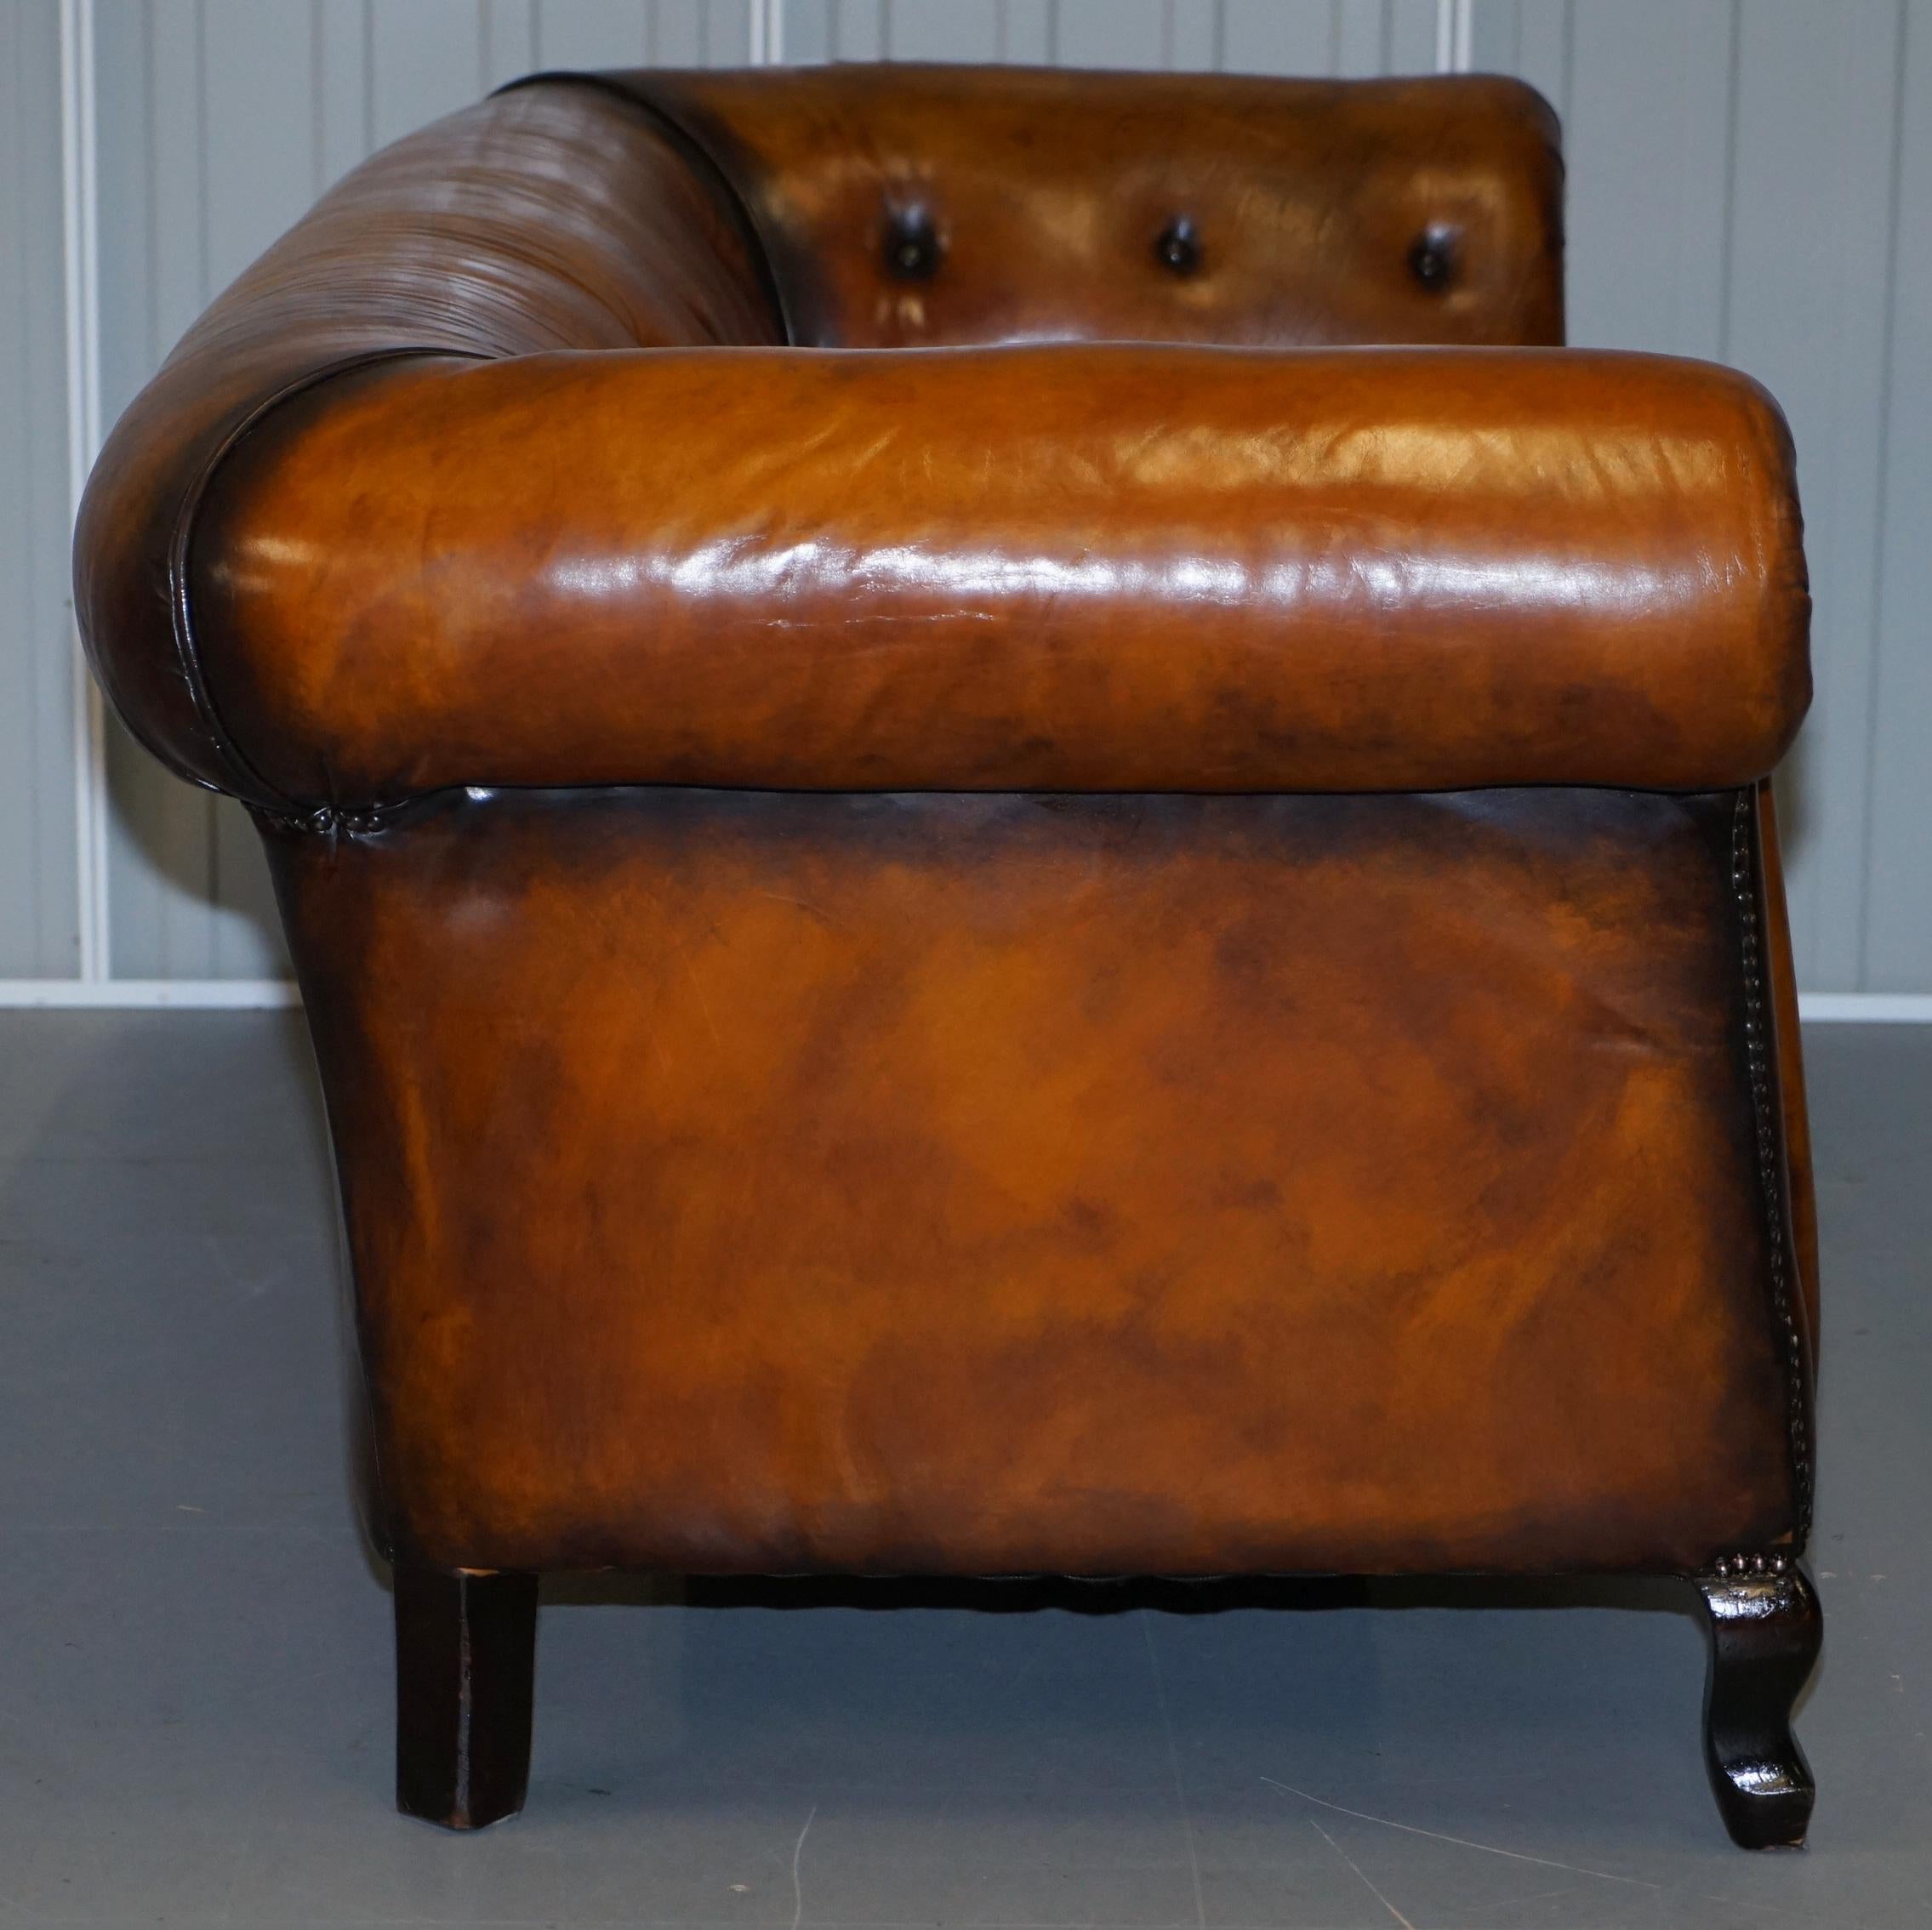 1 of 2 Restored Victorian Gentleman's Club Chesterfield Leather Sofas Kilim Seat For Sale 5